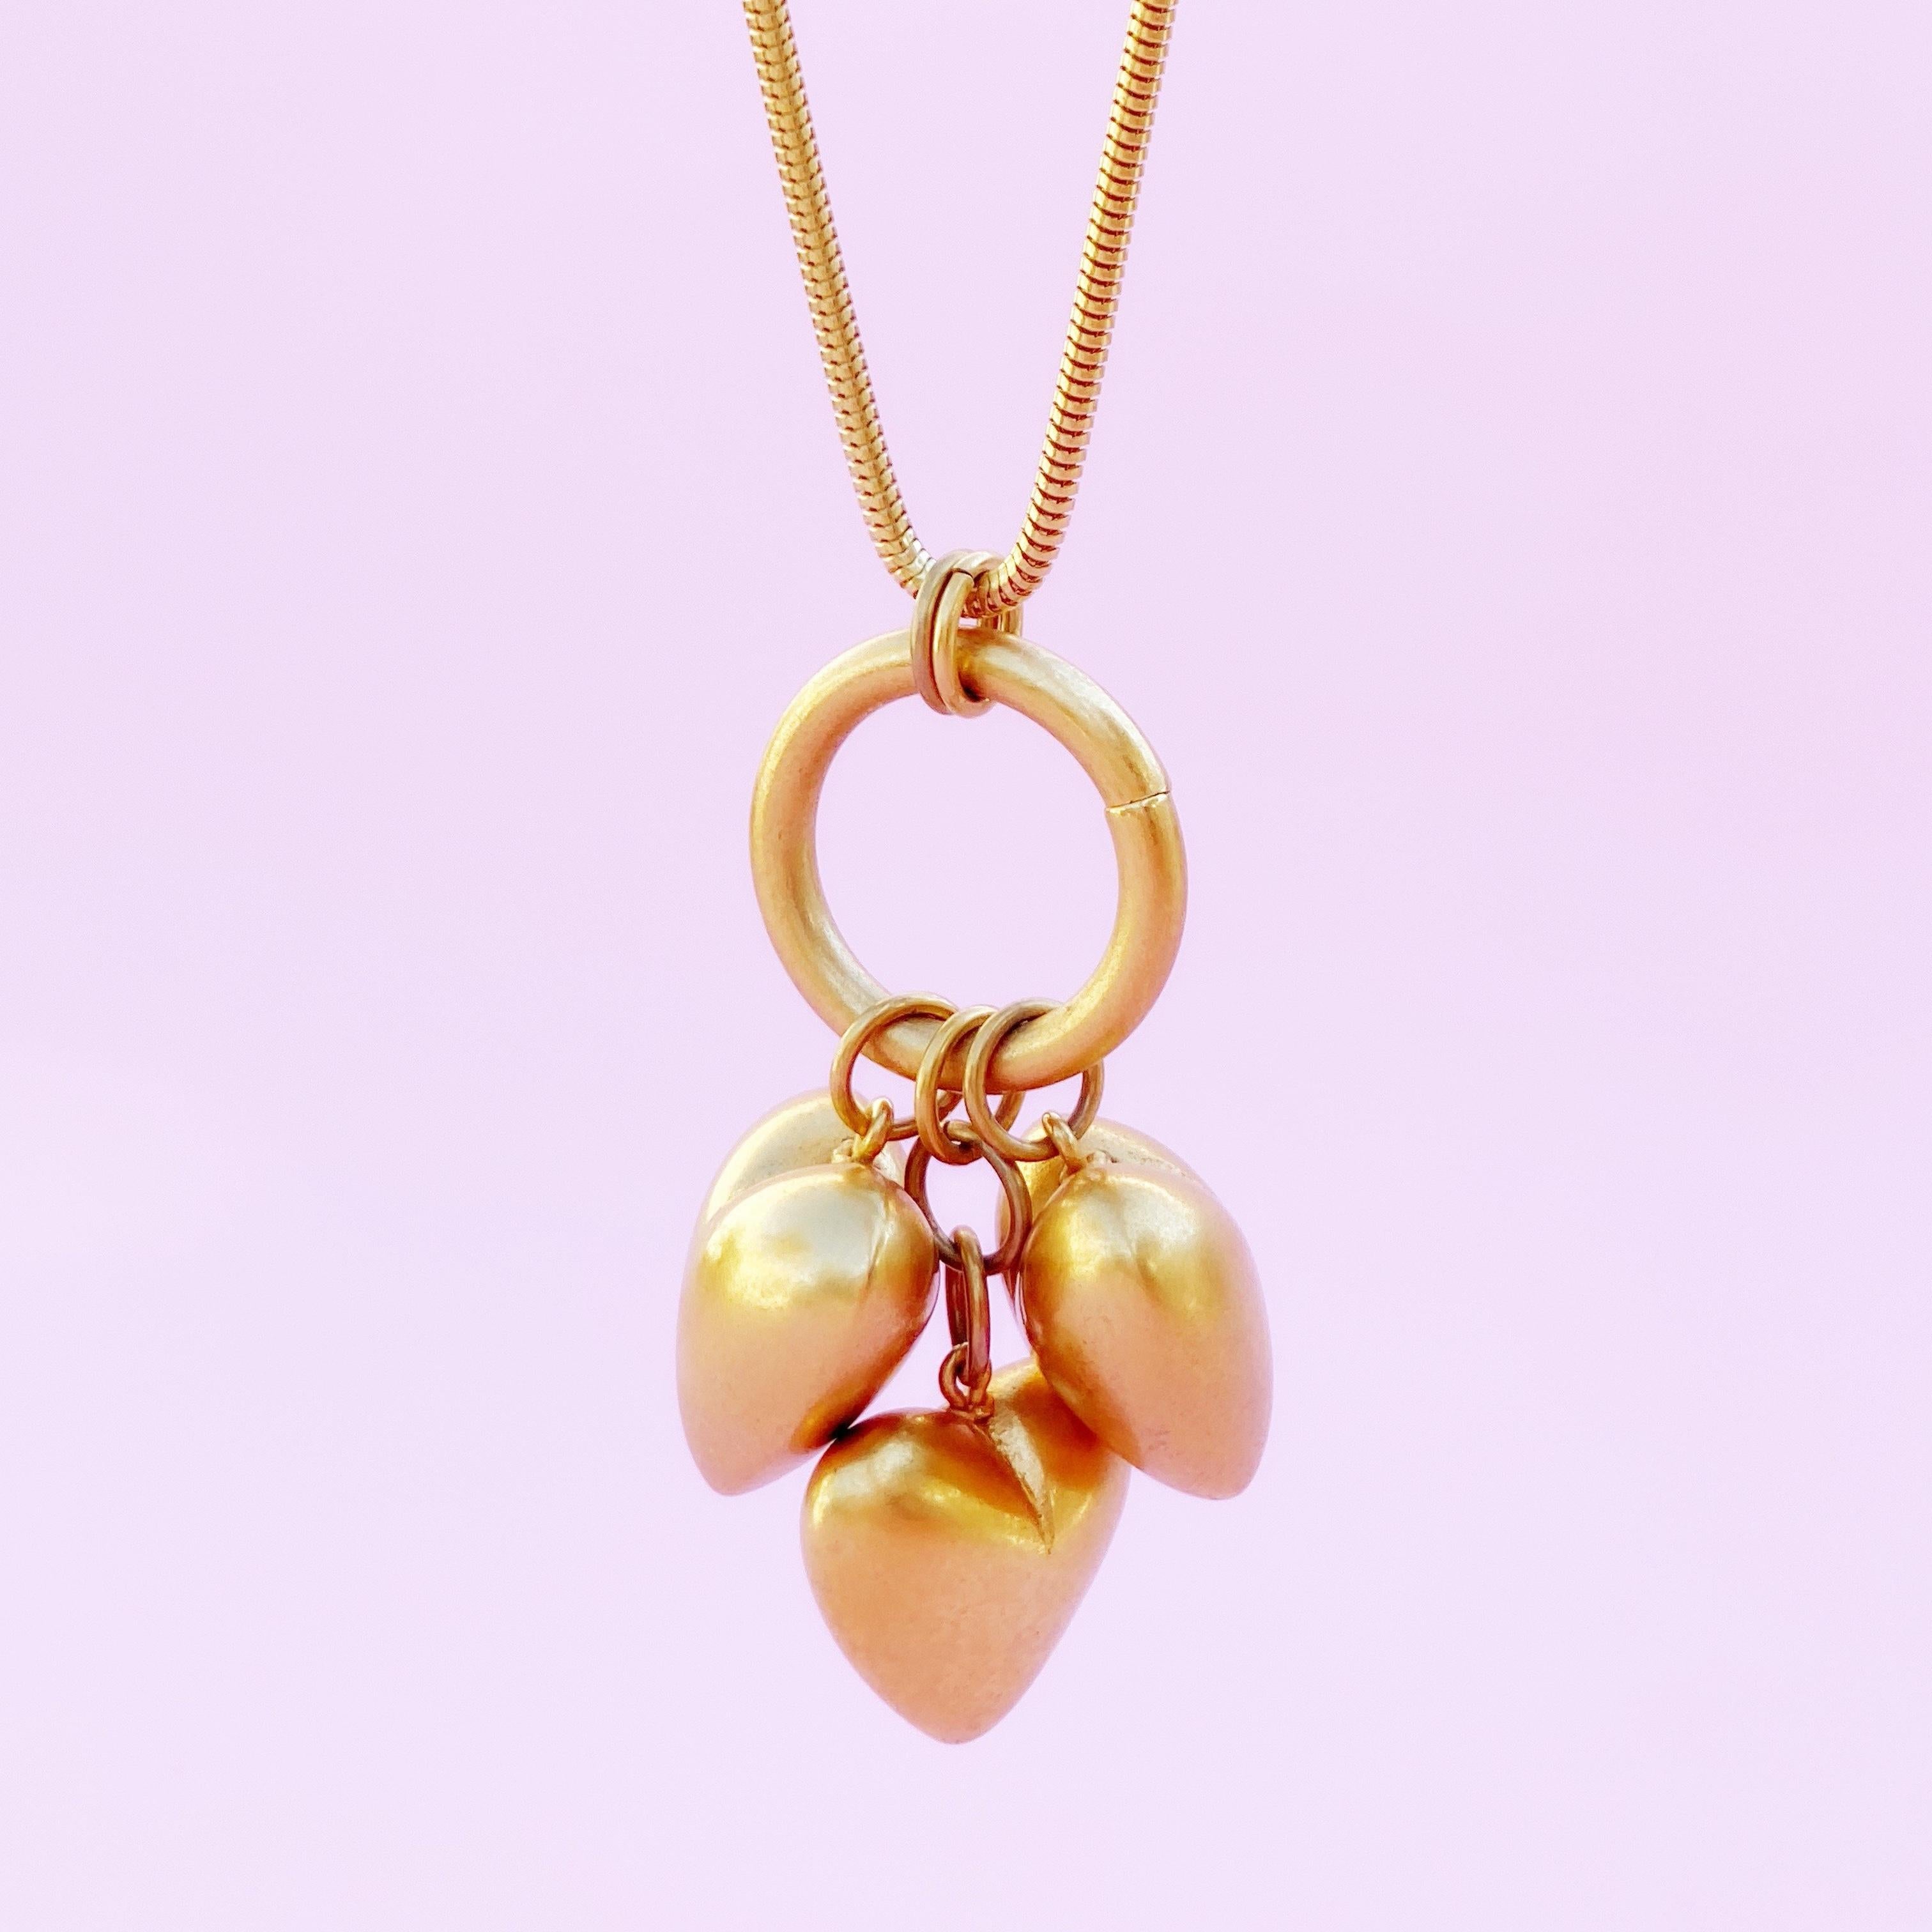 Modern Gilded Dangling Puffy Heart Charms Necklace w Snake Chain By Anne Klein, 1980s